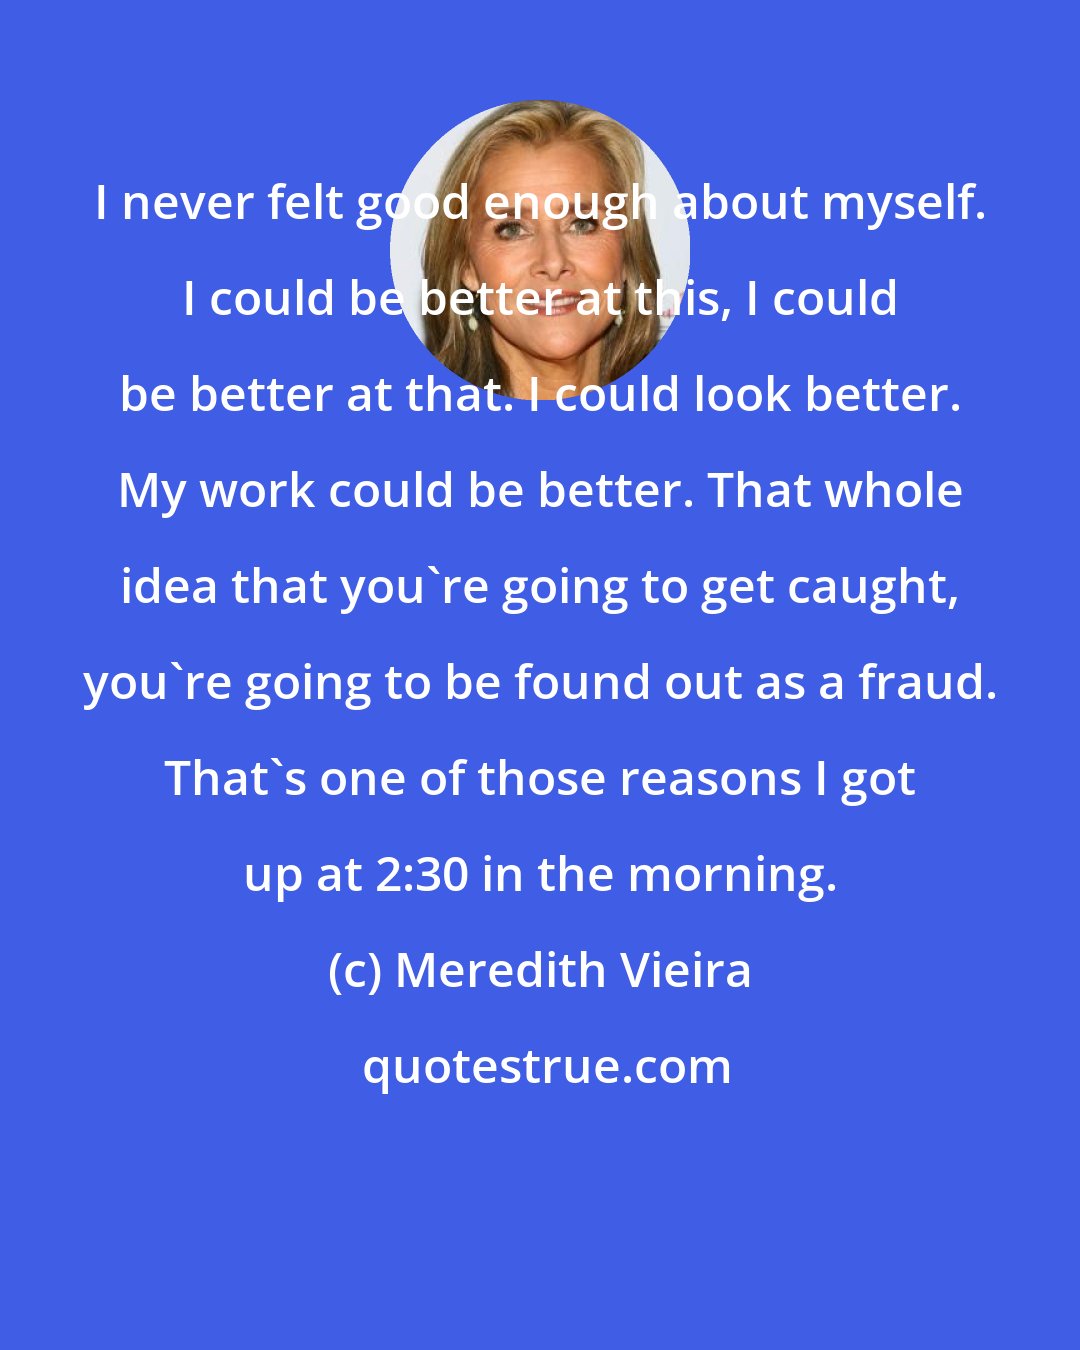 Meredith Vieira: I never felt good enough about myself. I could be better at this, I could be better at that. I could look better. My work could be better. That whole idea that you're going to get caught, you're going to be found out as a fraud. That's one of those reasons I got up at 2:30 in the morning.